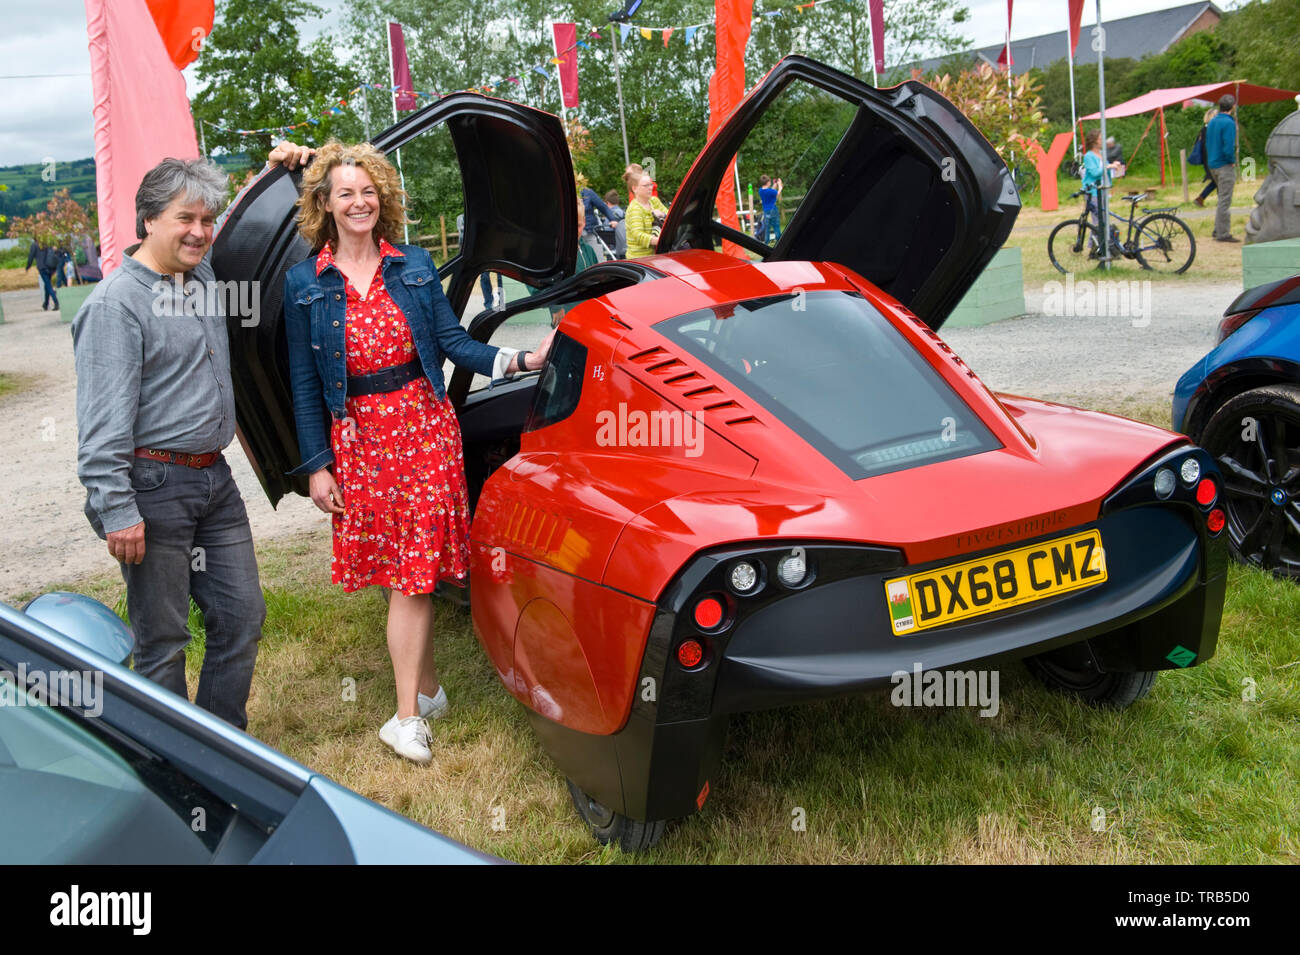 Auto a idrogeno in mostra a Hay Festival Hugo Spowers con Kate umile Hay on Wye Powys Wales UK Foto Stock